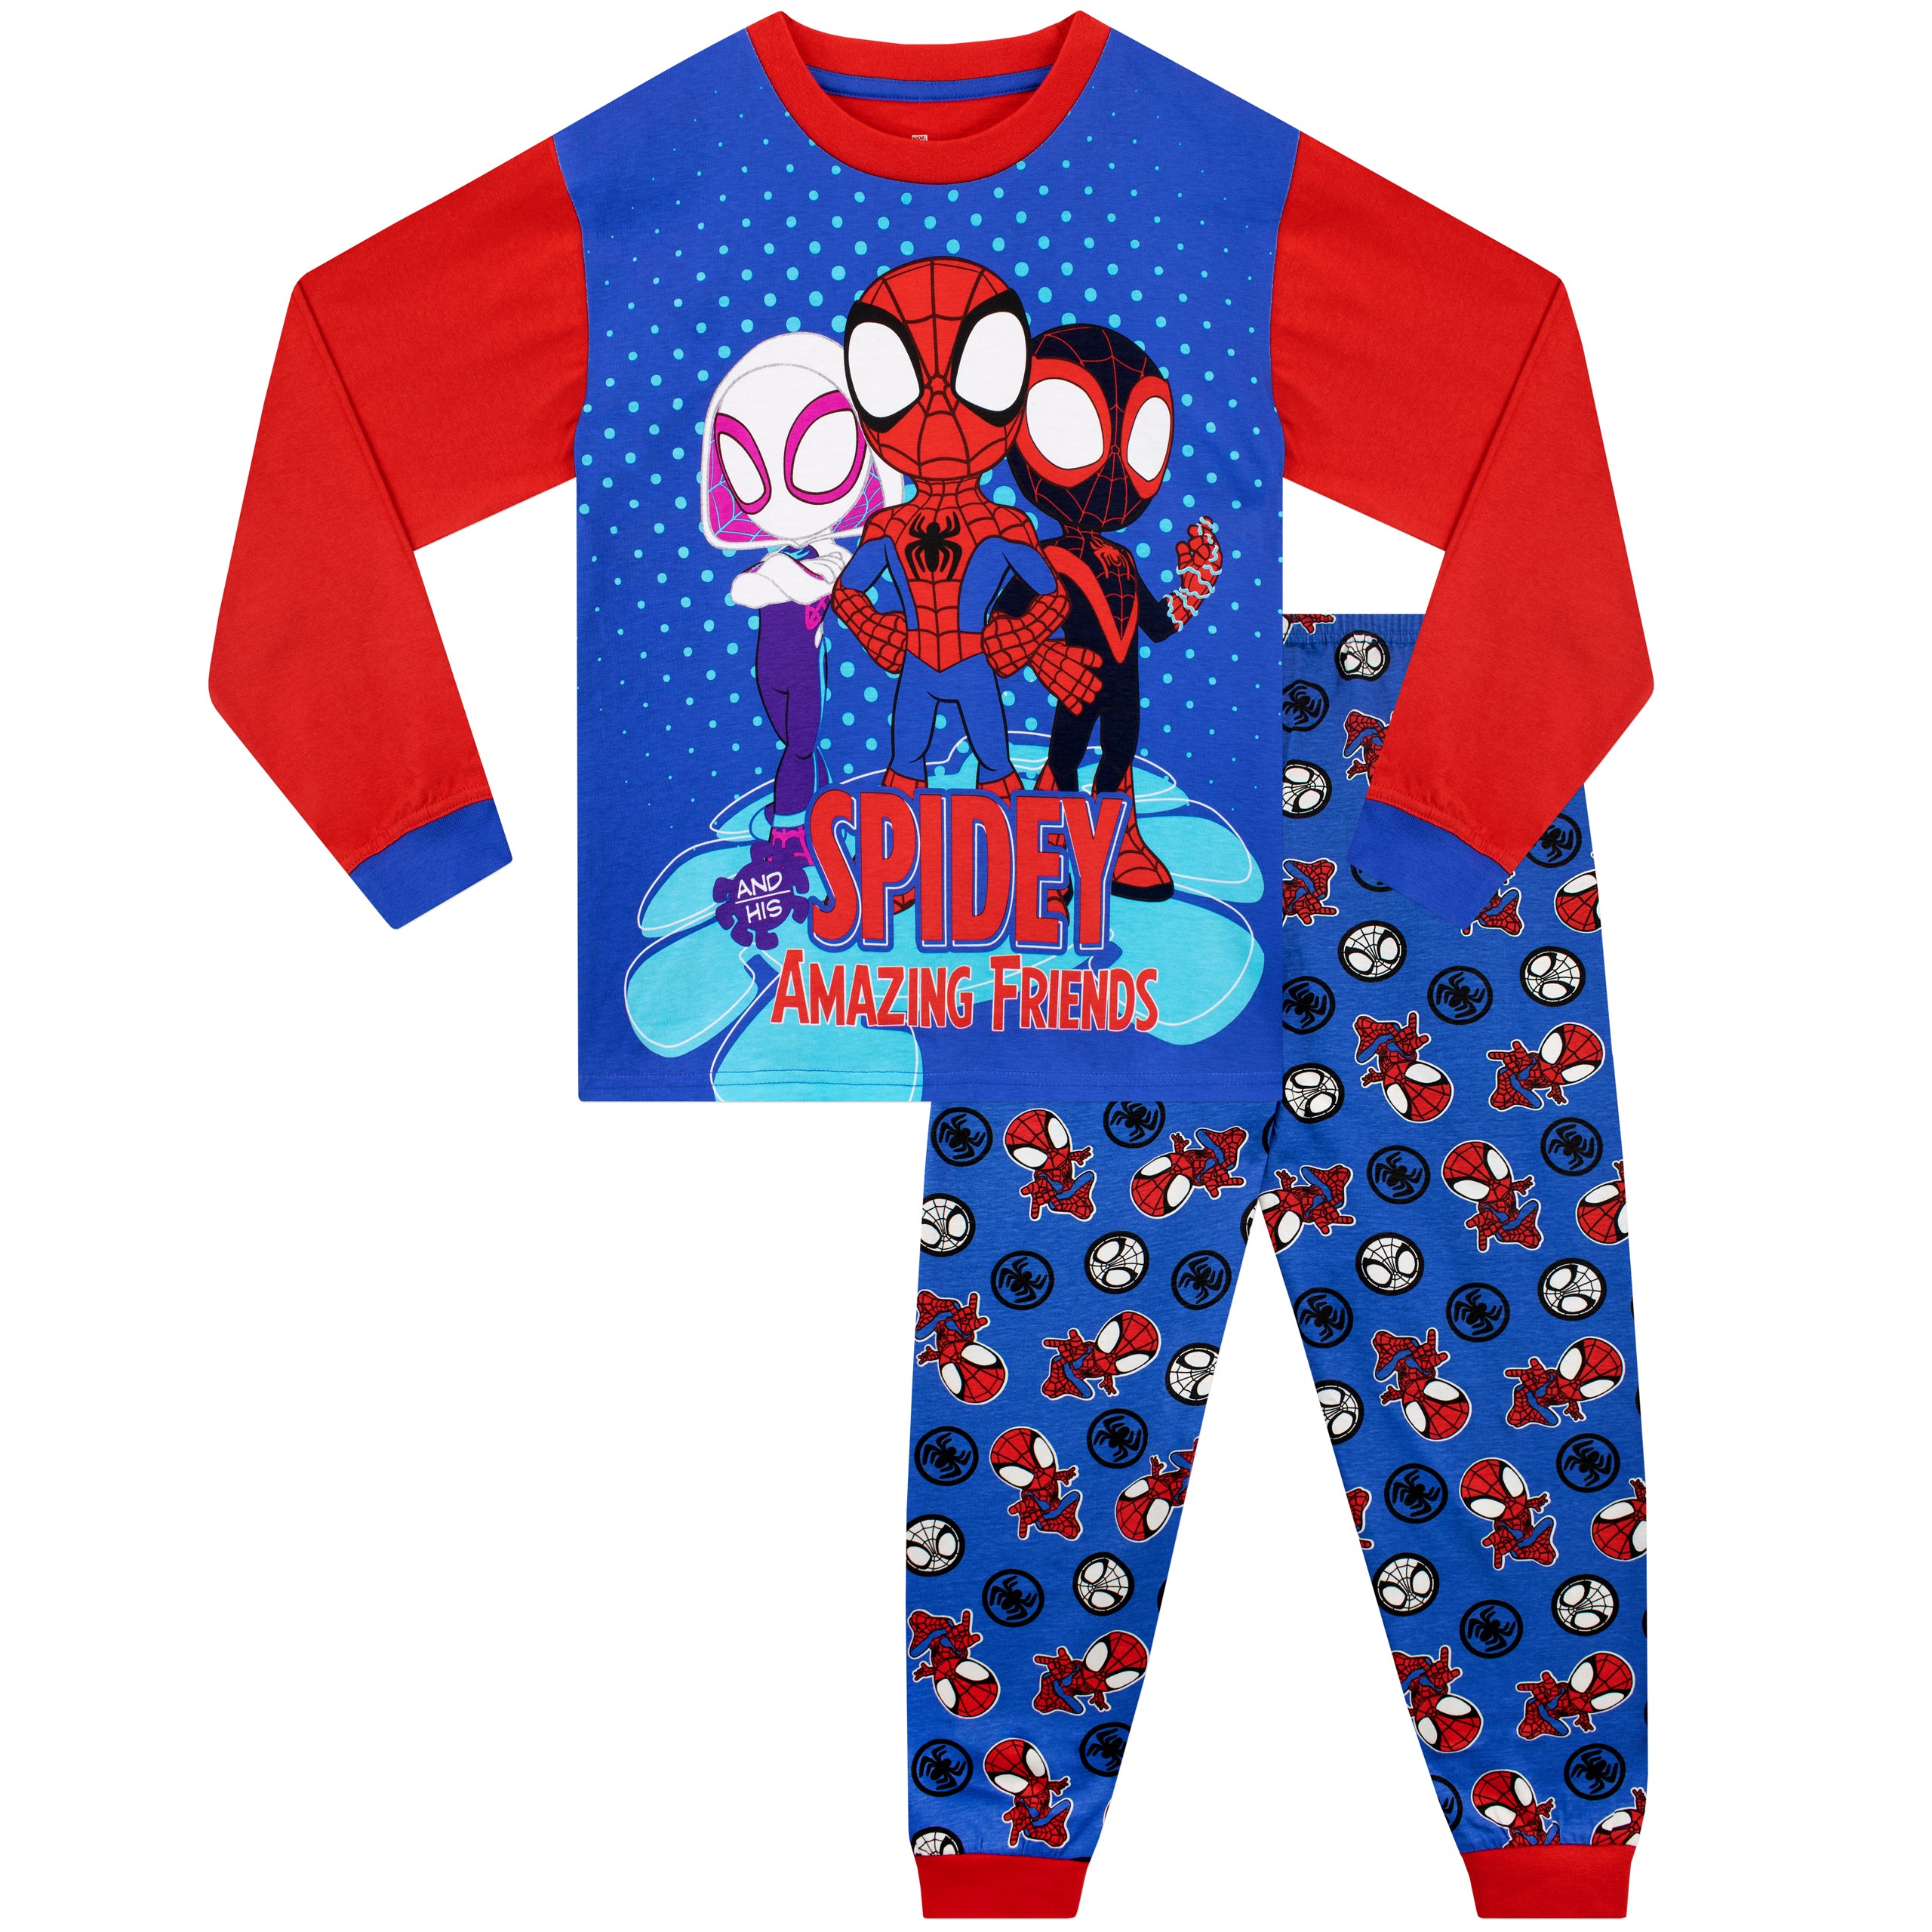 https://cdn.shopify.com/s/files/1/1235/0120/products/smpj1738-Spidey-and-his-Amazing-Friends-Pyjamas-1-square.jpg?v=1674466766